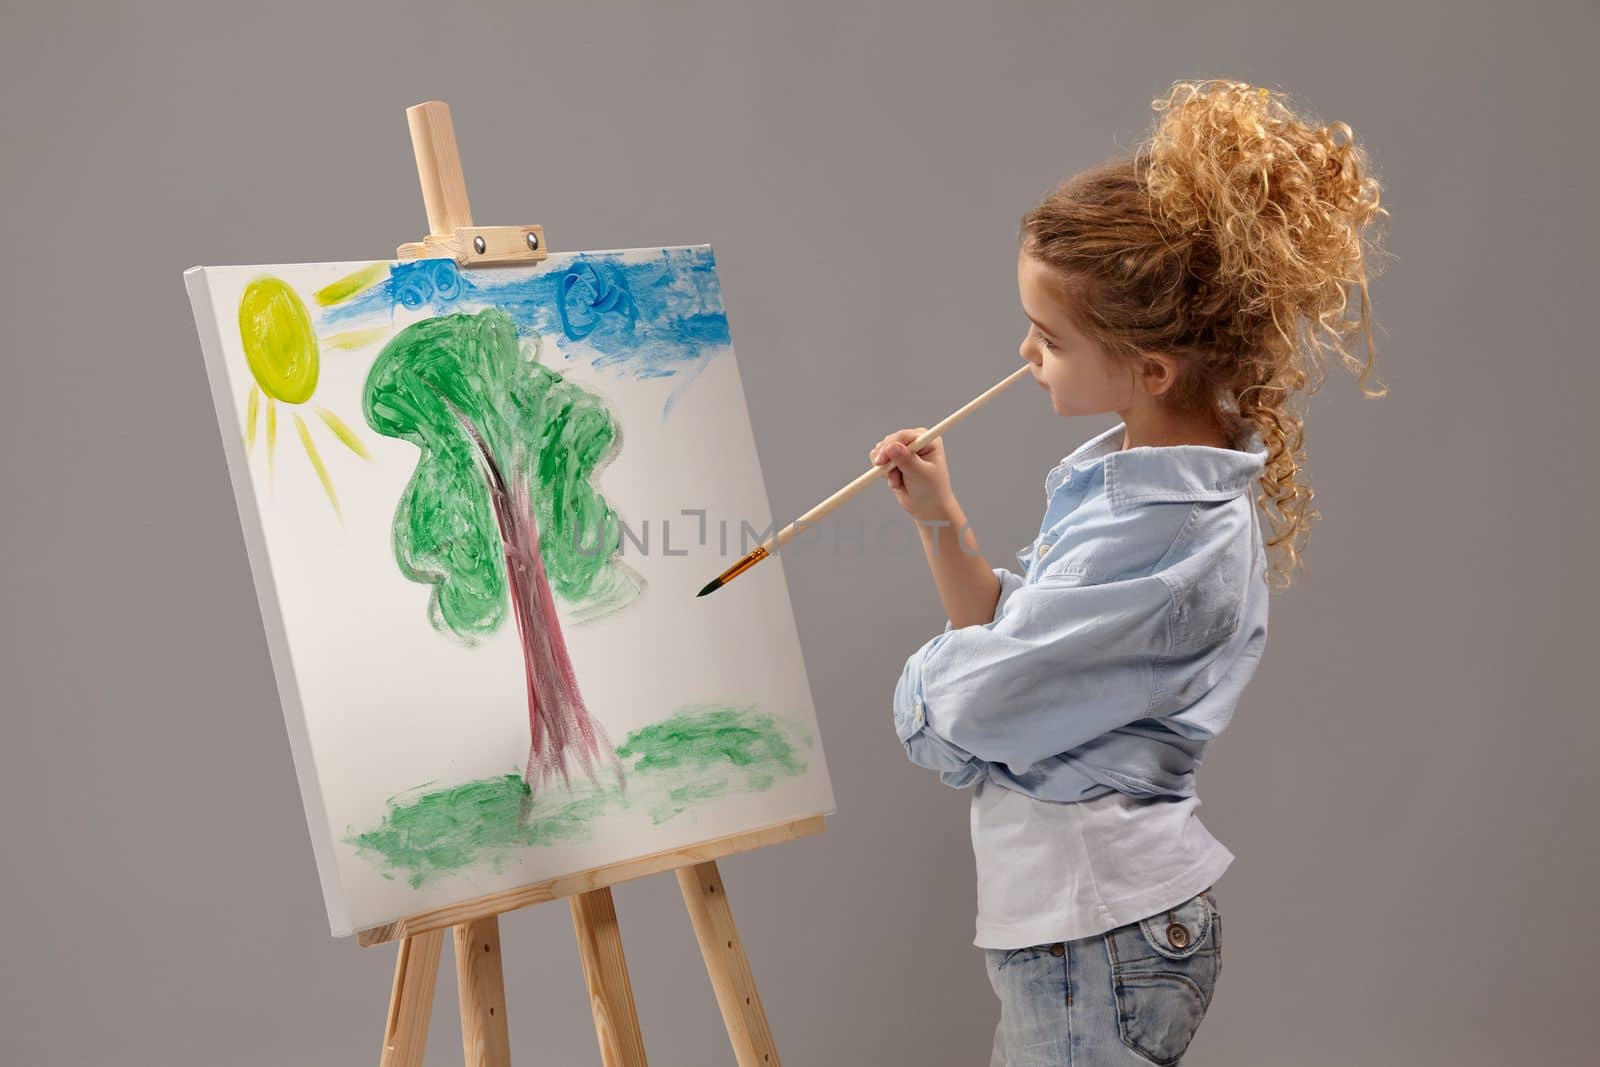 Talanted school girl whith a curly blond hair, wearing in a blue shirt and white t-shirt is painting with a watercolor brush on an easel, standing on a gray background.